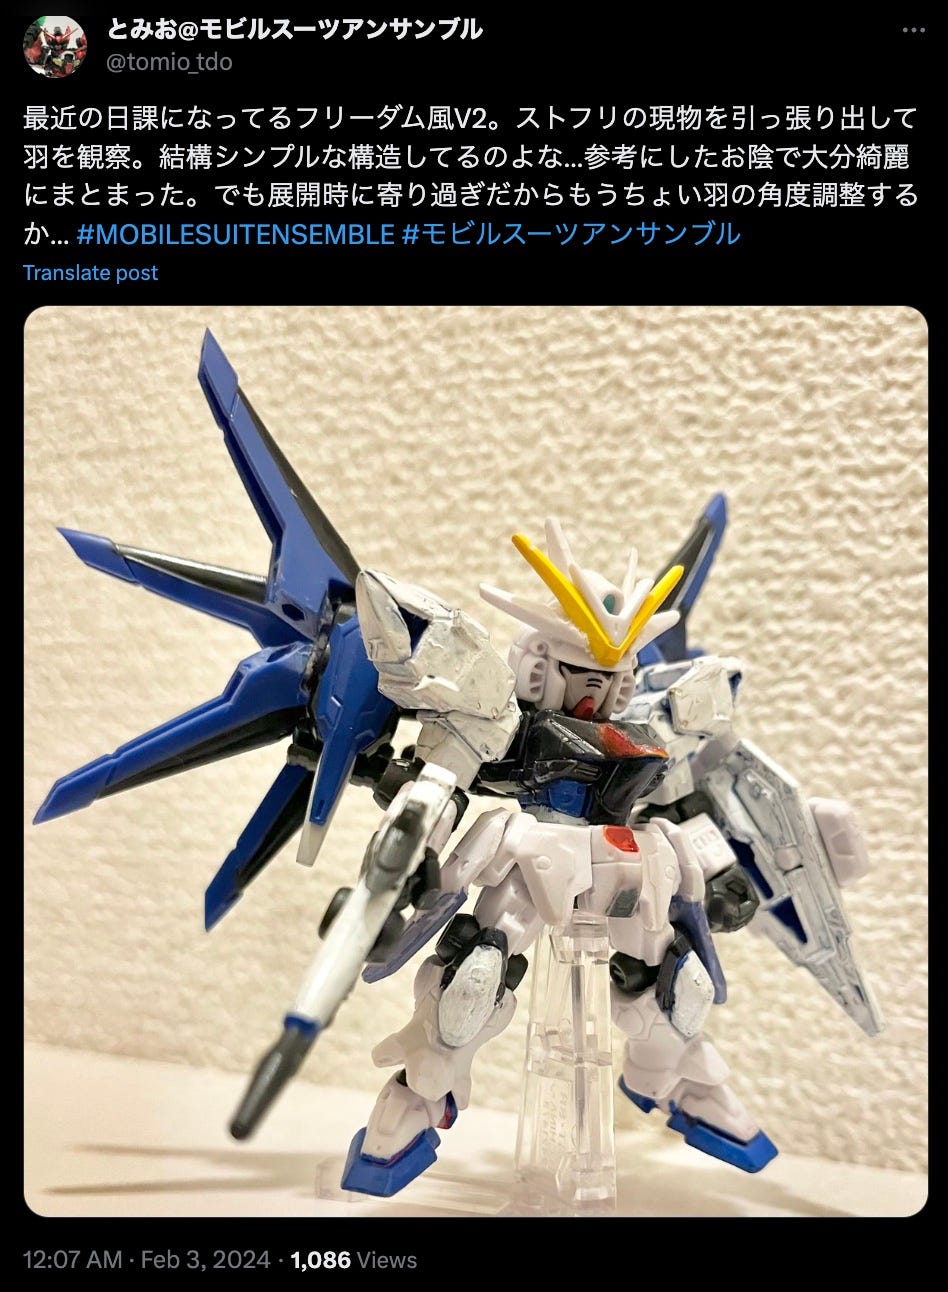 A Japanese tweet with a photo of a Gundam that uses the verb まとまった.